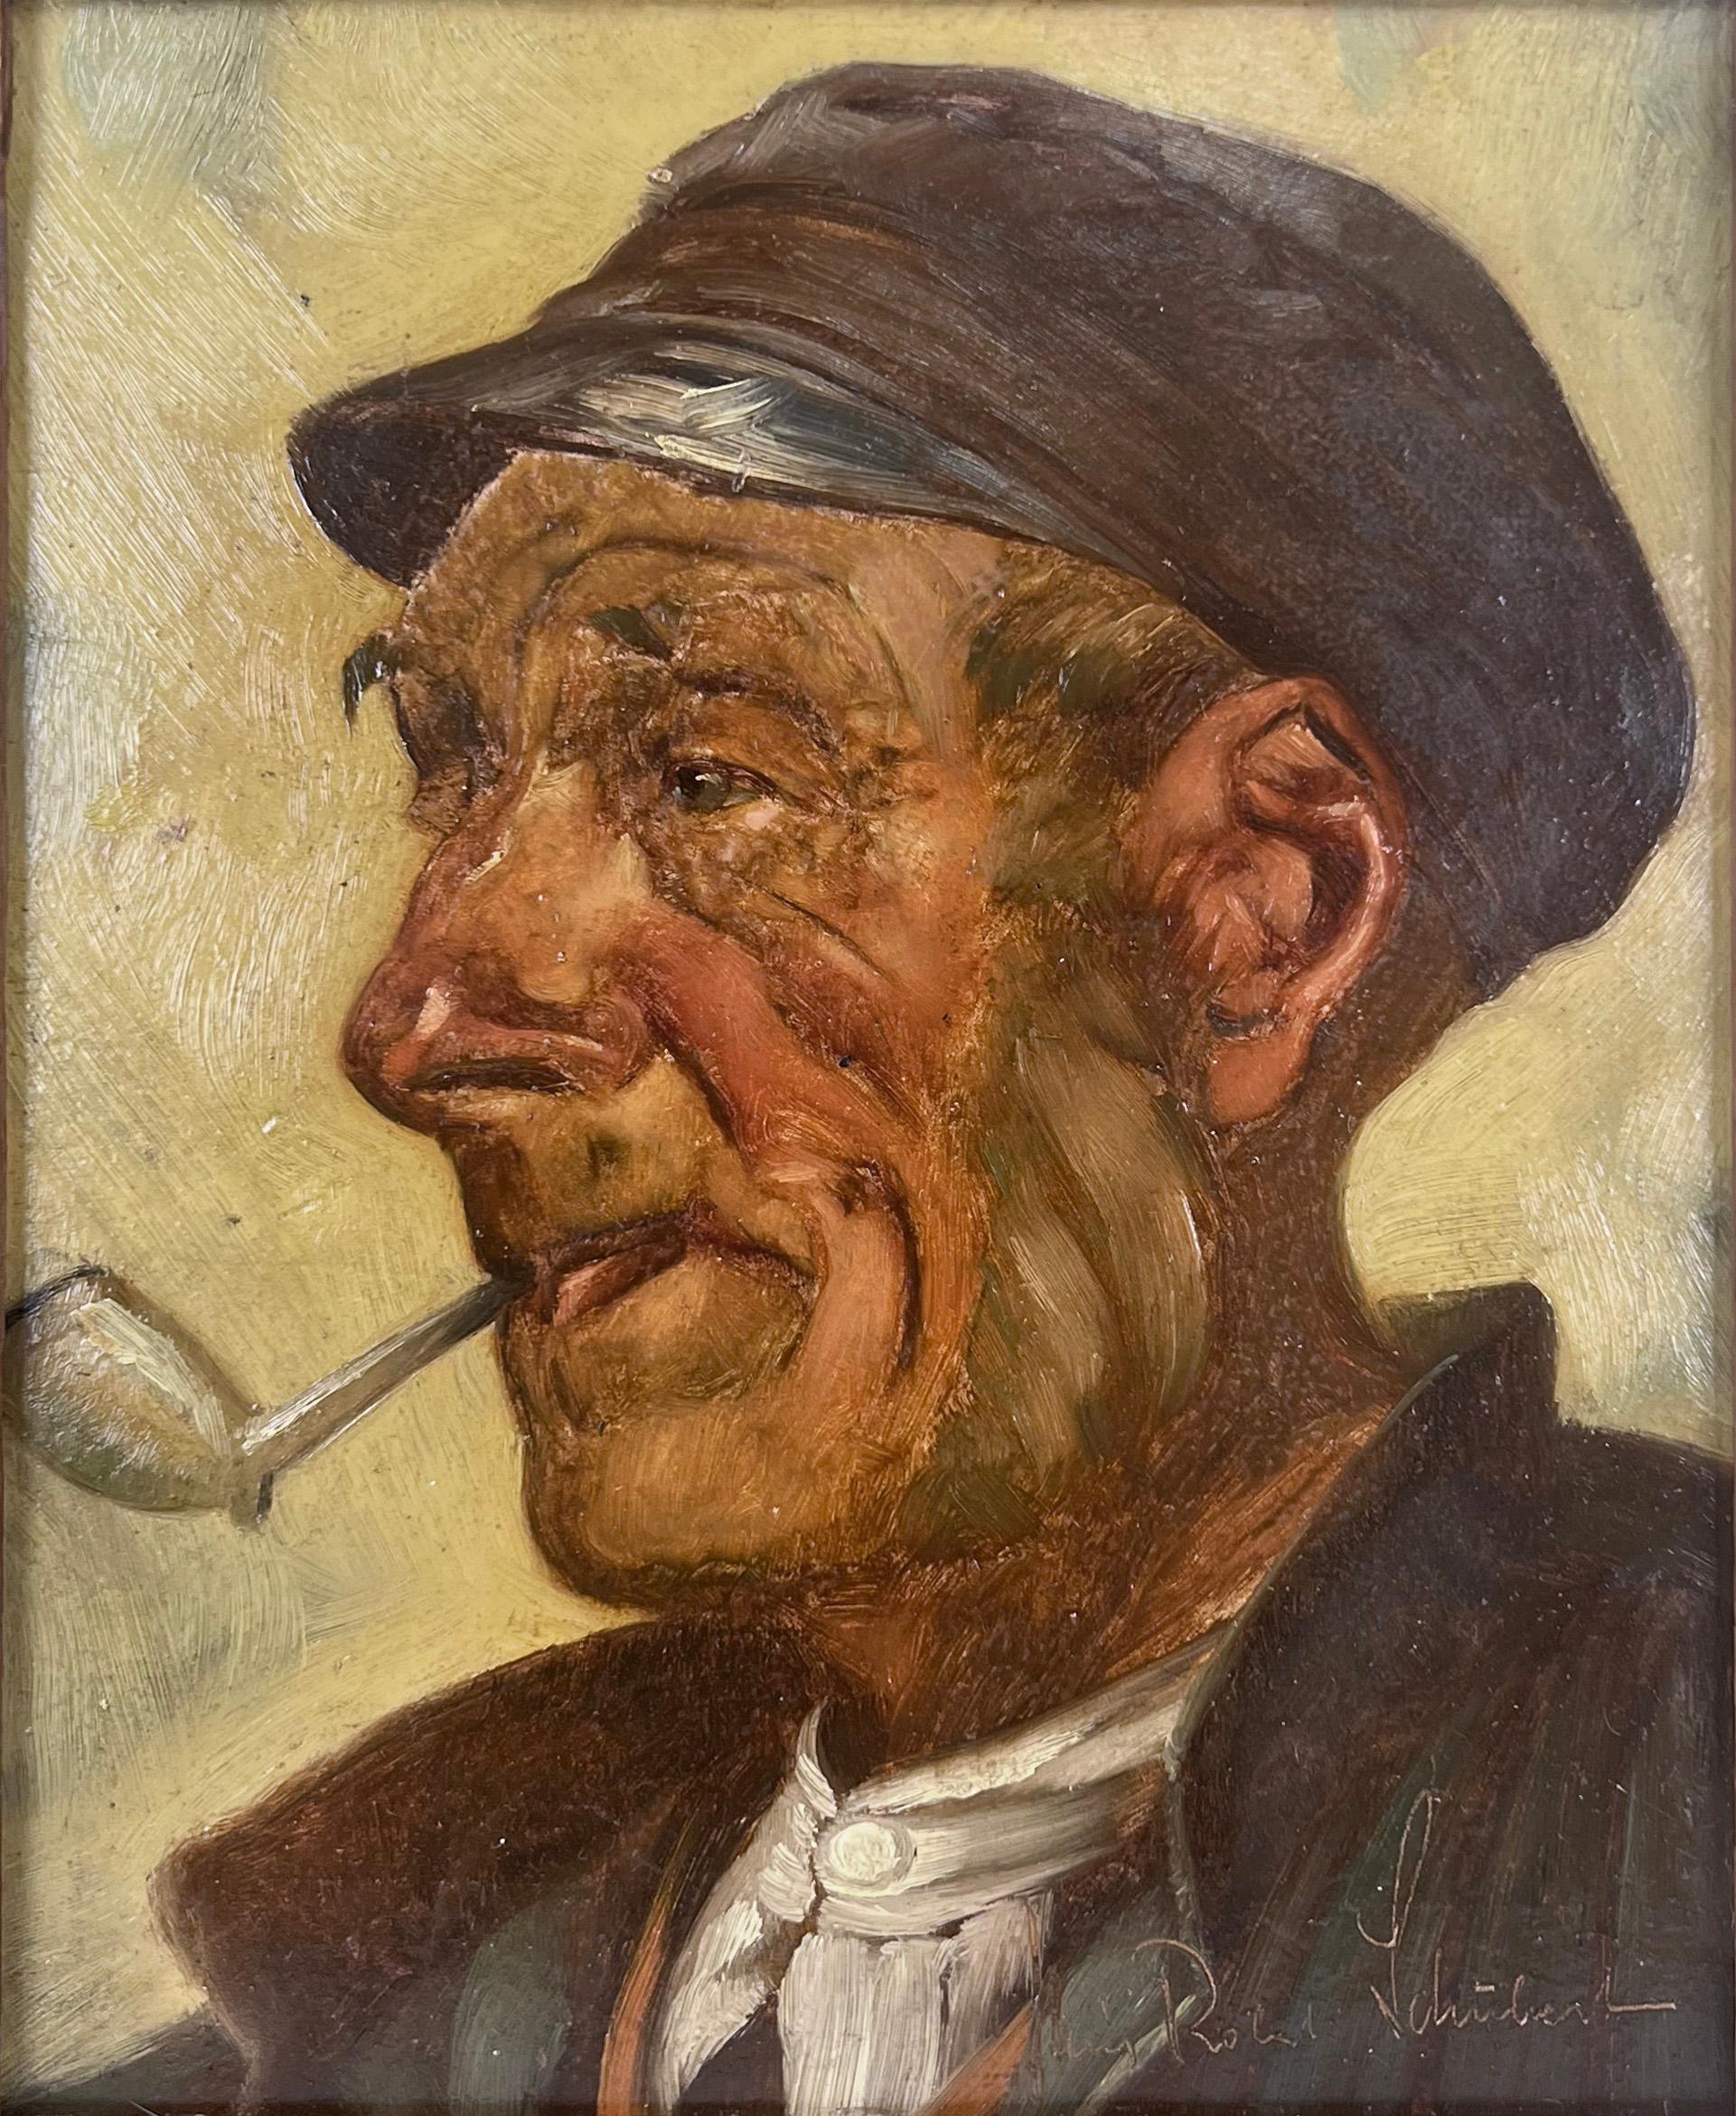 Portrait of a Man Smoking a Pipe in Oil on Masonite - Painting by Heinz Robert Schubert